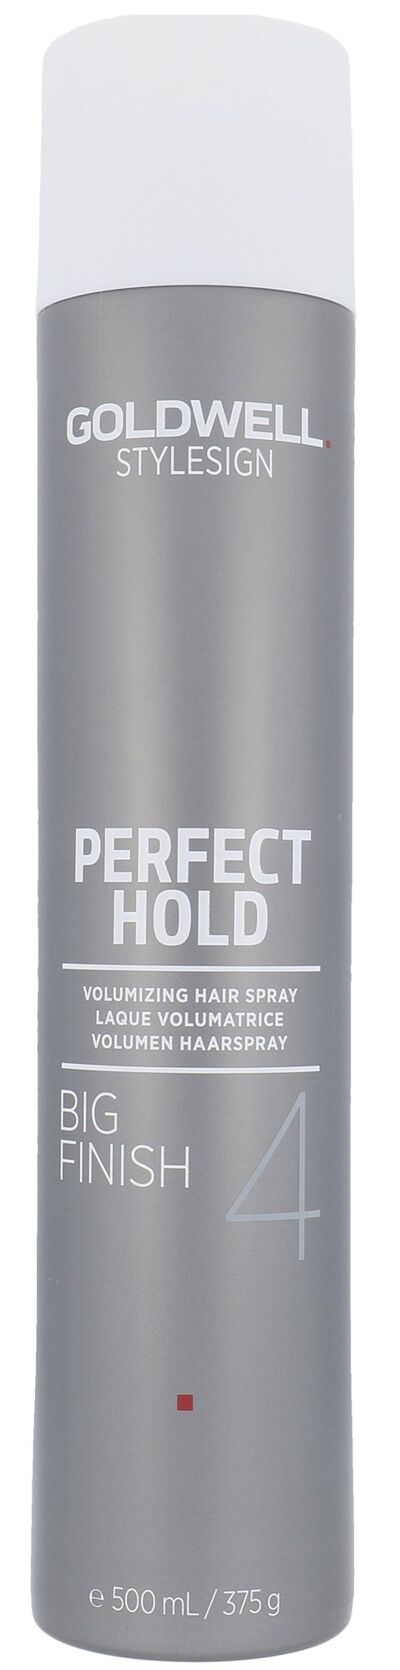 Goldwell Style Sign Cosmetic 500ml 